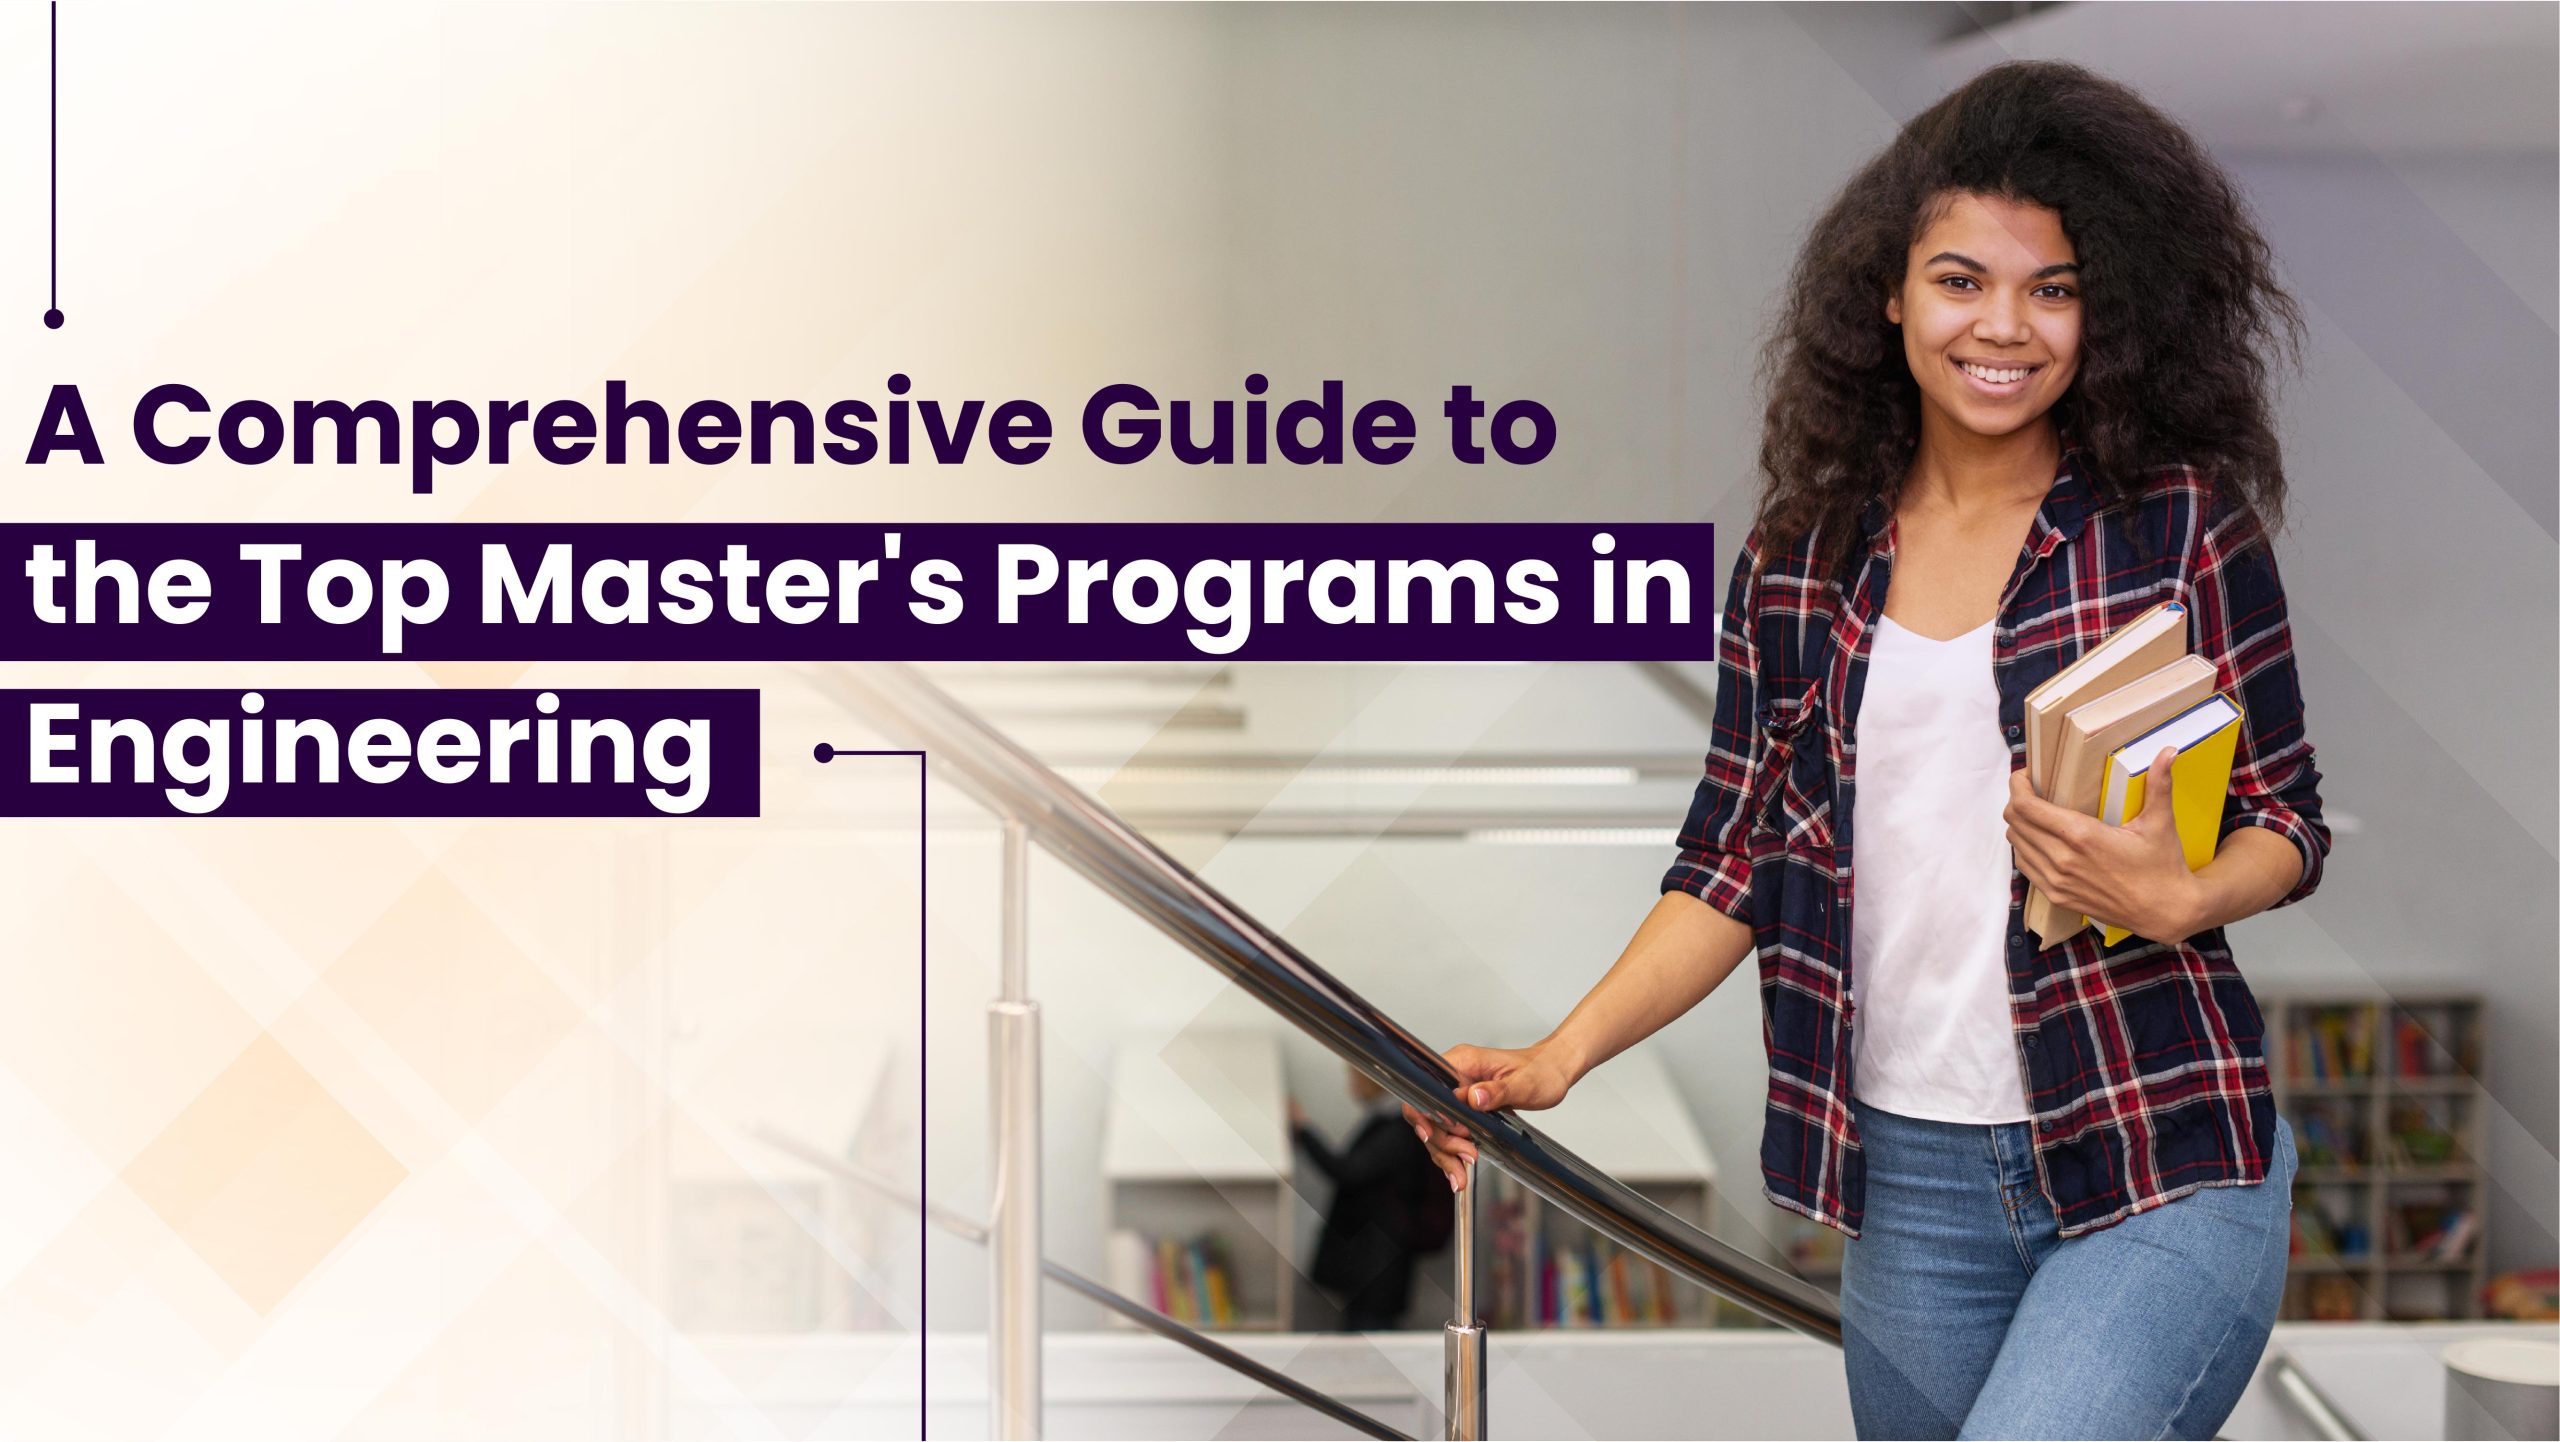 A Comprehensive Guide to the Top Master’s Programs in Engineering